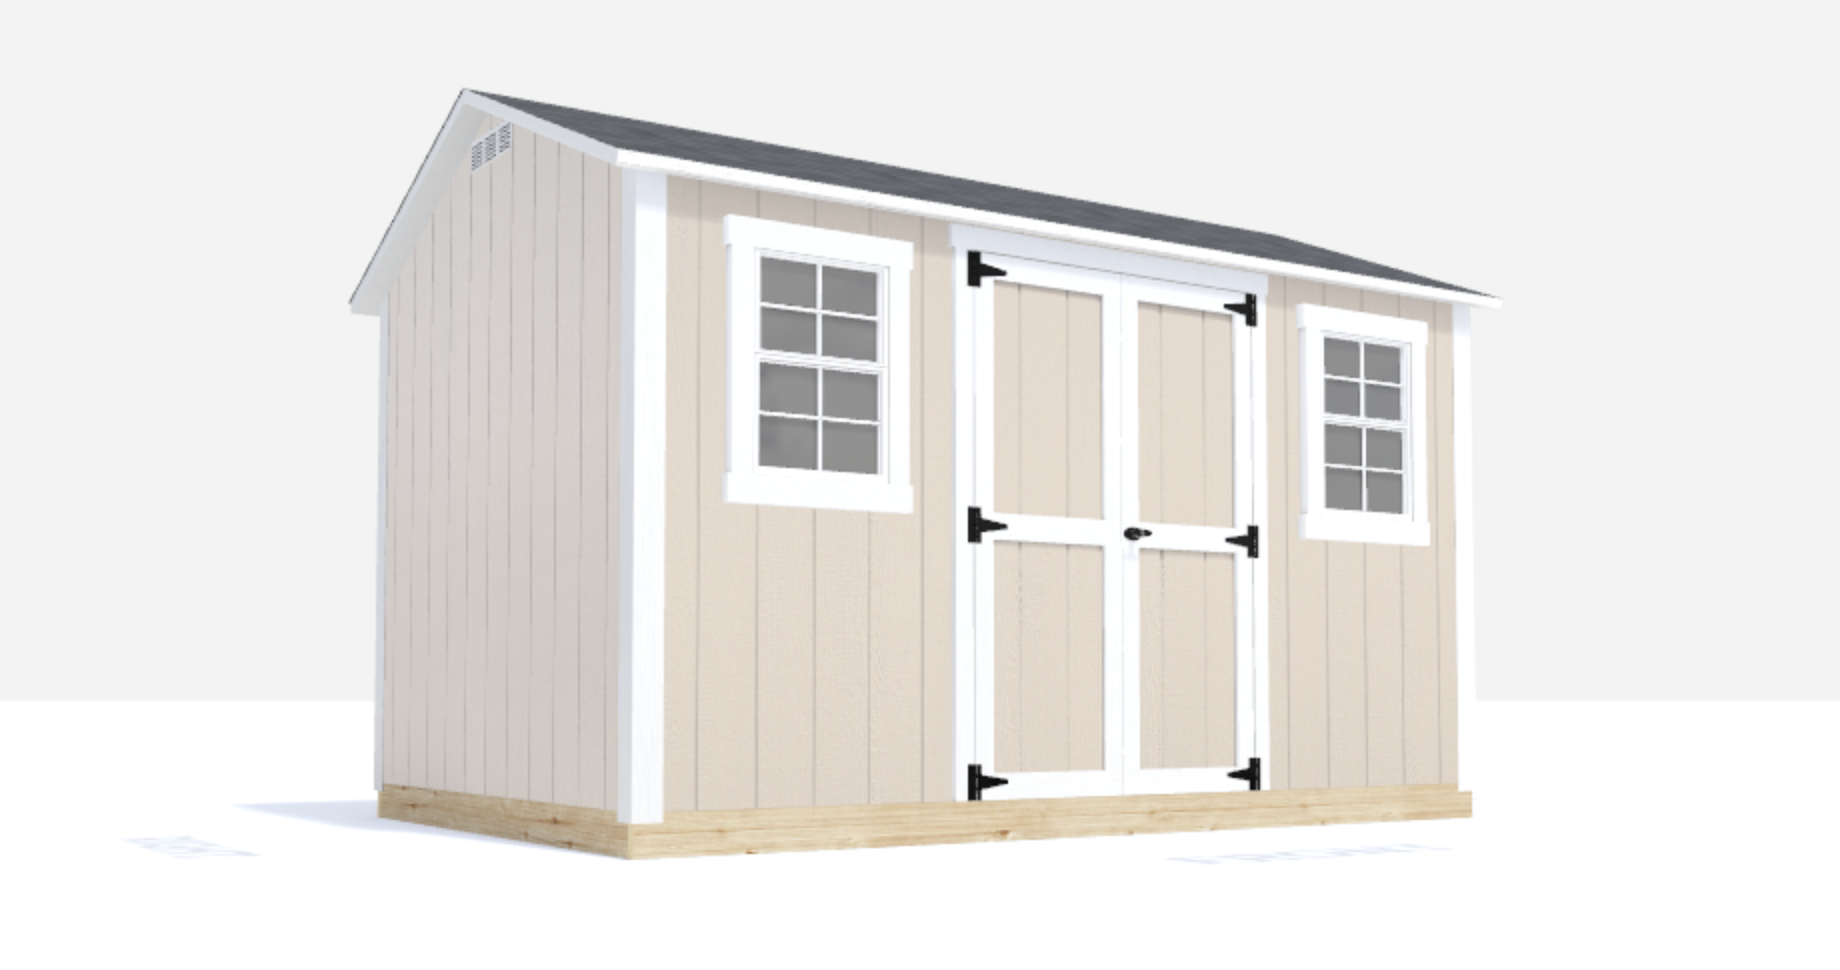 8x12 gable shed